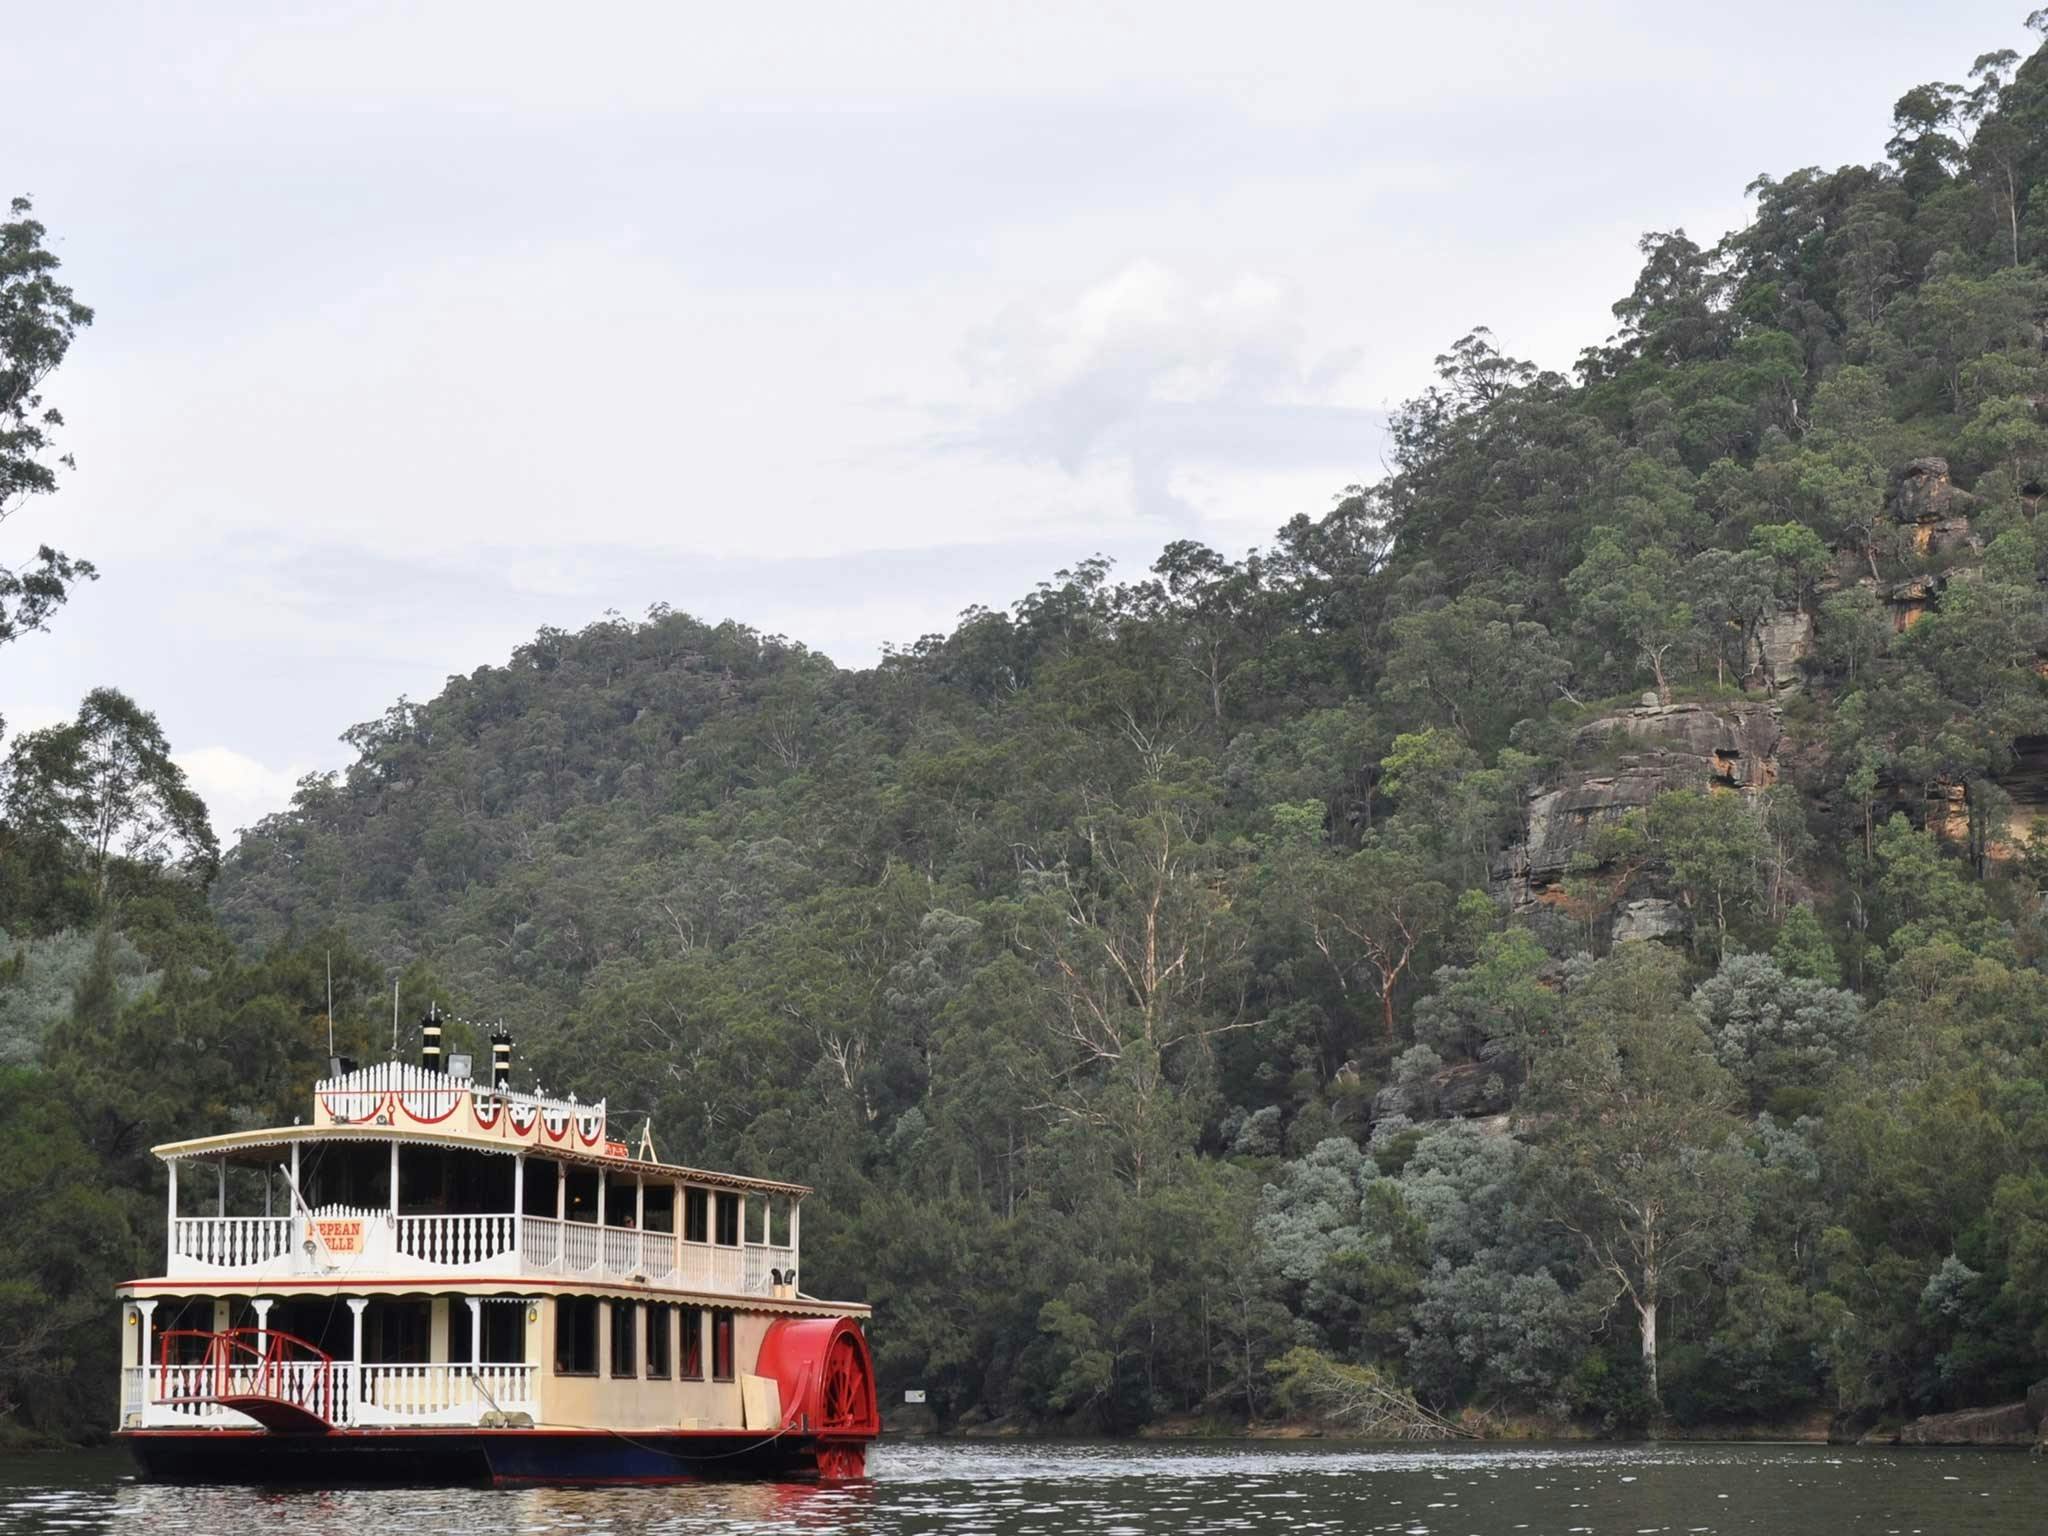 cruise the nepean river gorge